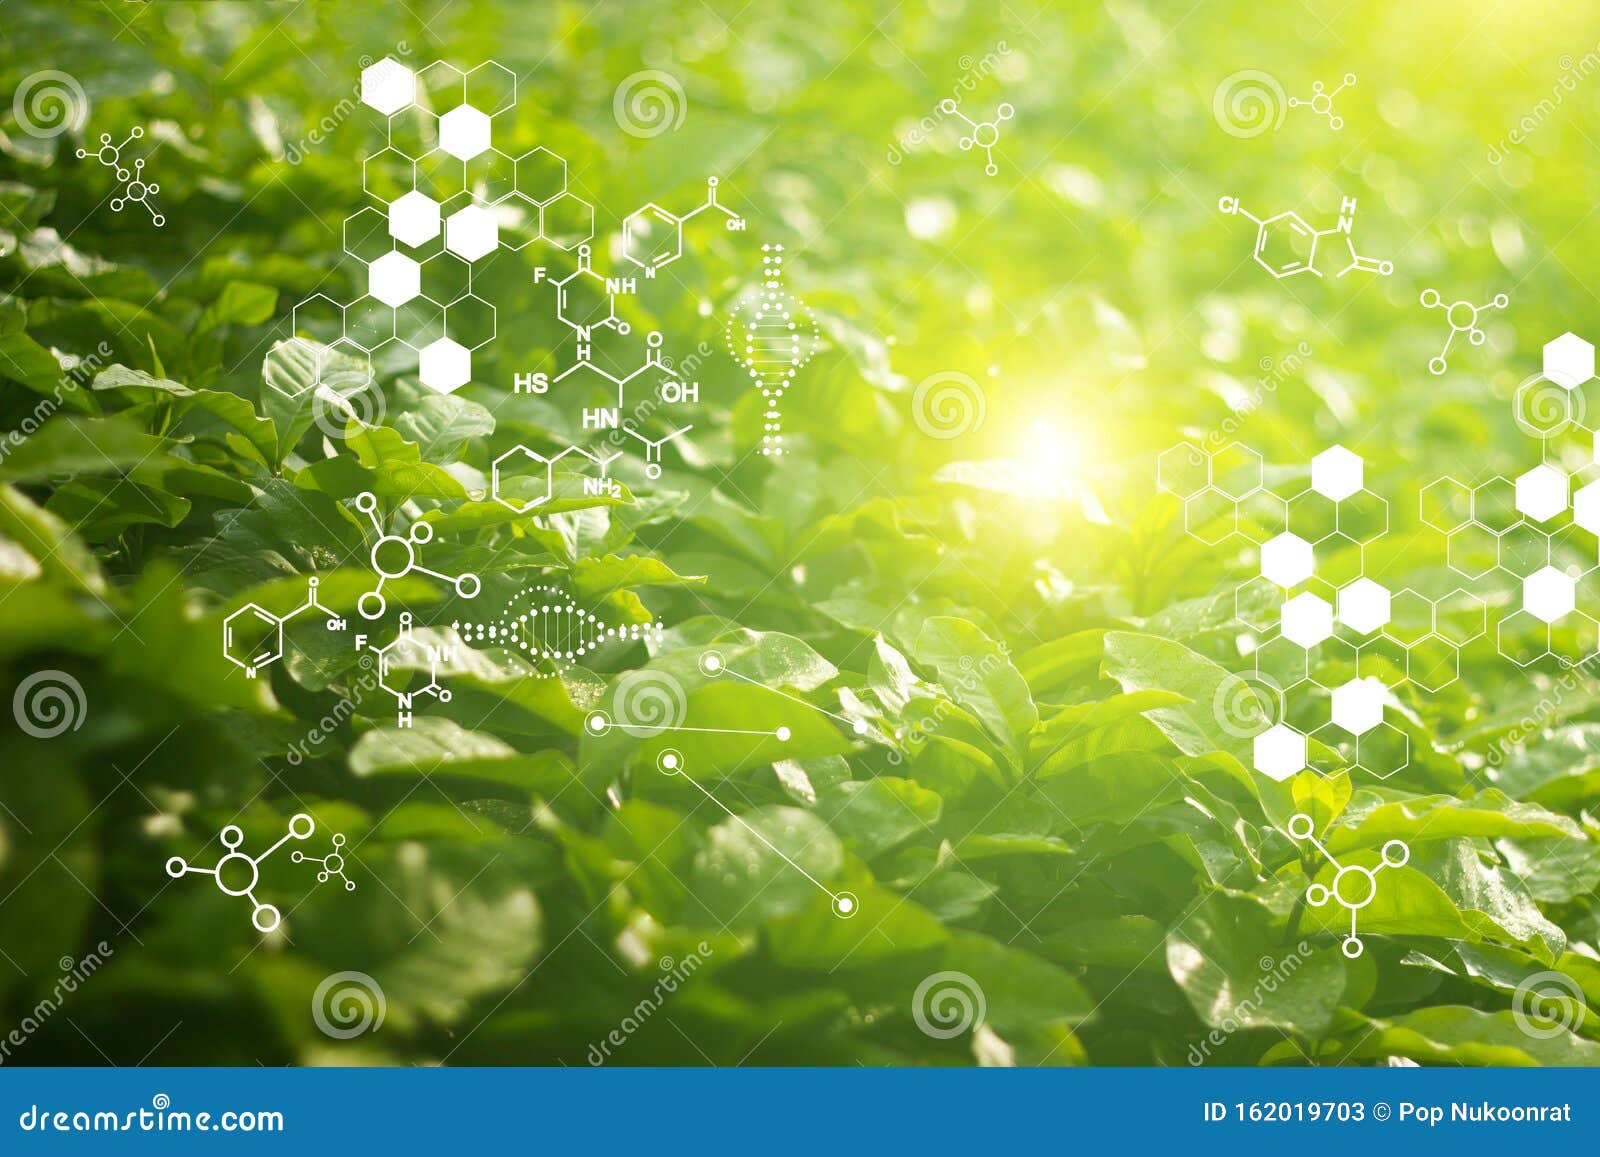 biology laboratory nature and science, plants with biochemistry structure on green background